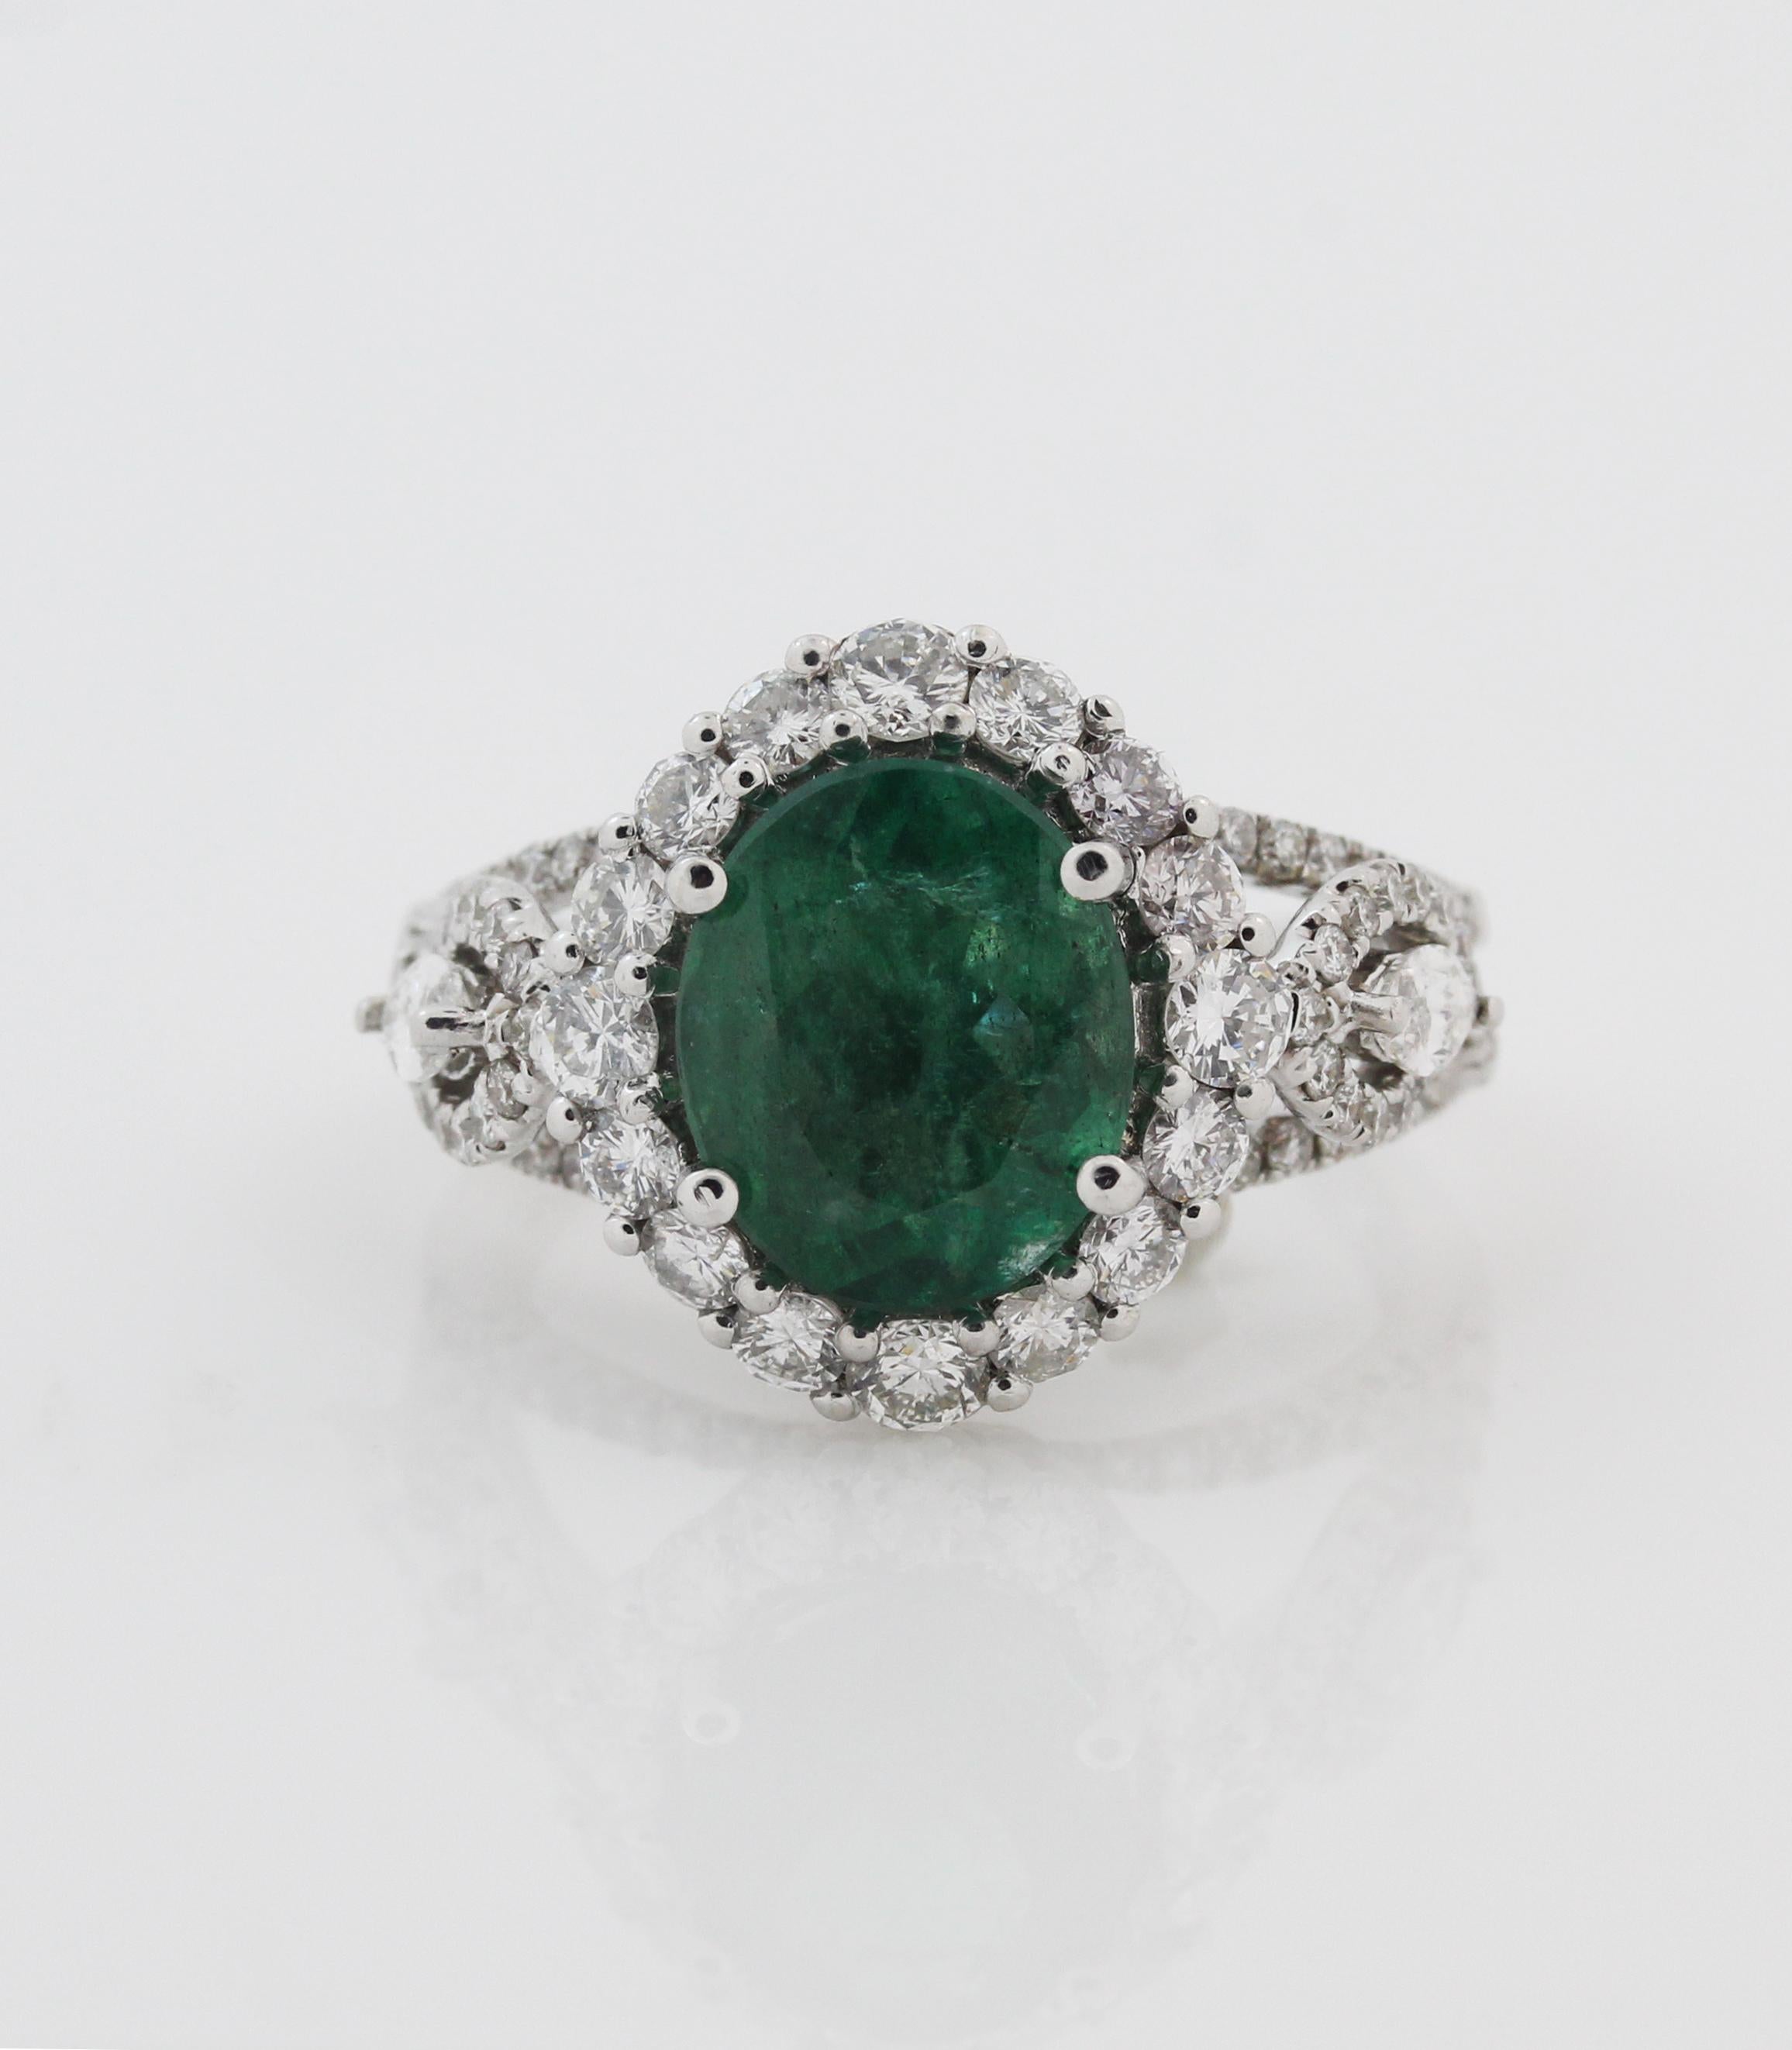 14K White Gold and Diamond Ring with Oval Emerald center

Center Emerald is oval, from Zambia, apprx. 3.20 carat, 10mm x 8mm 

Ring has 1.44 carat diamonds

Size 6. Sizable